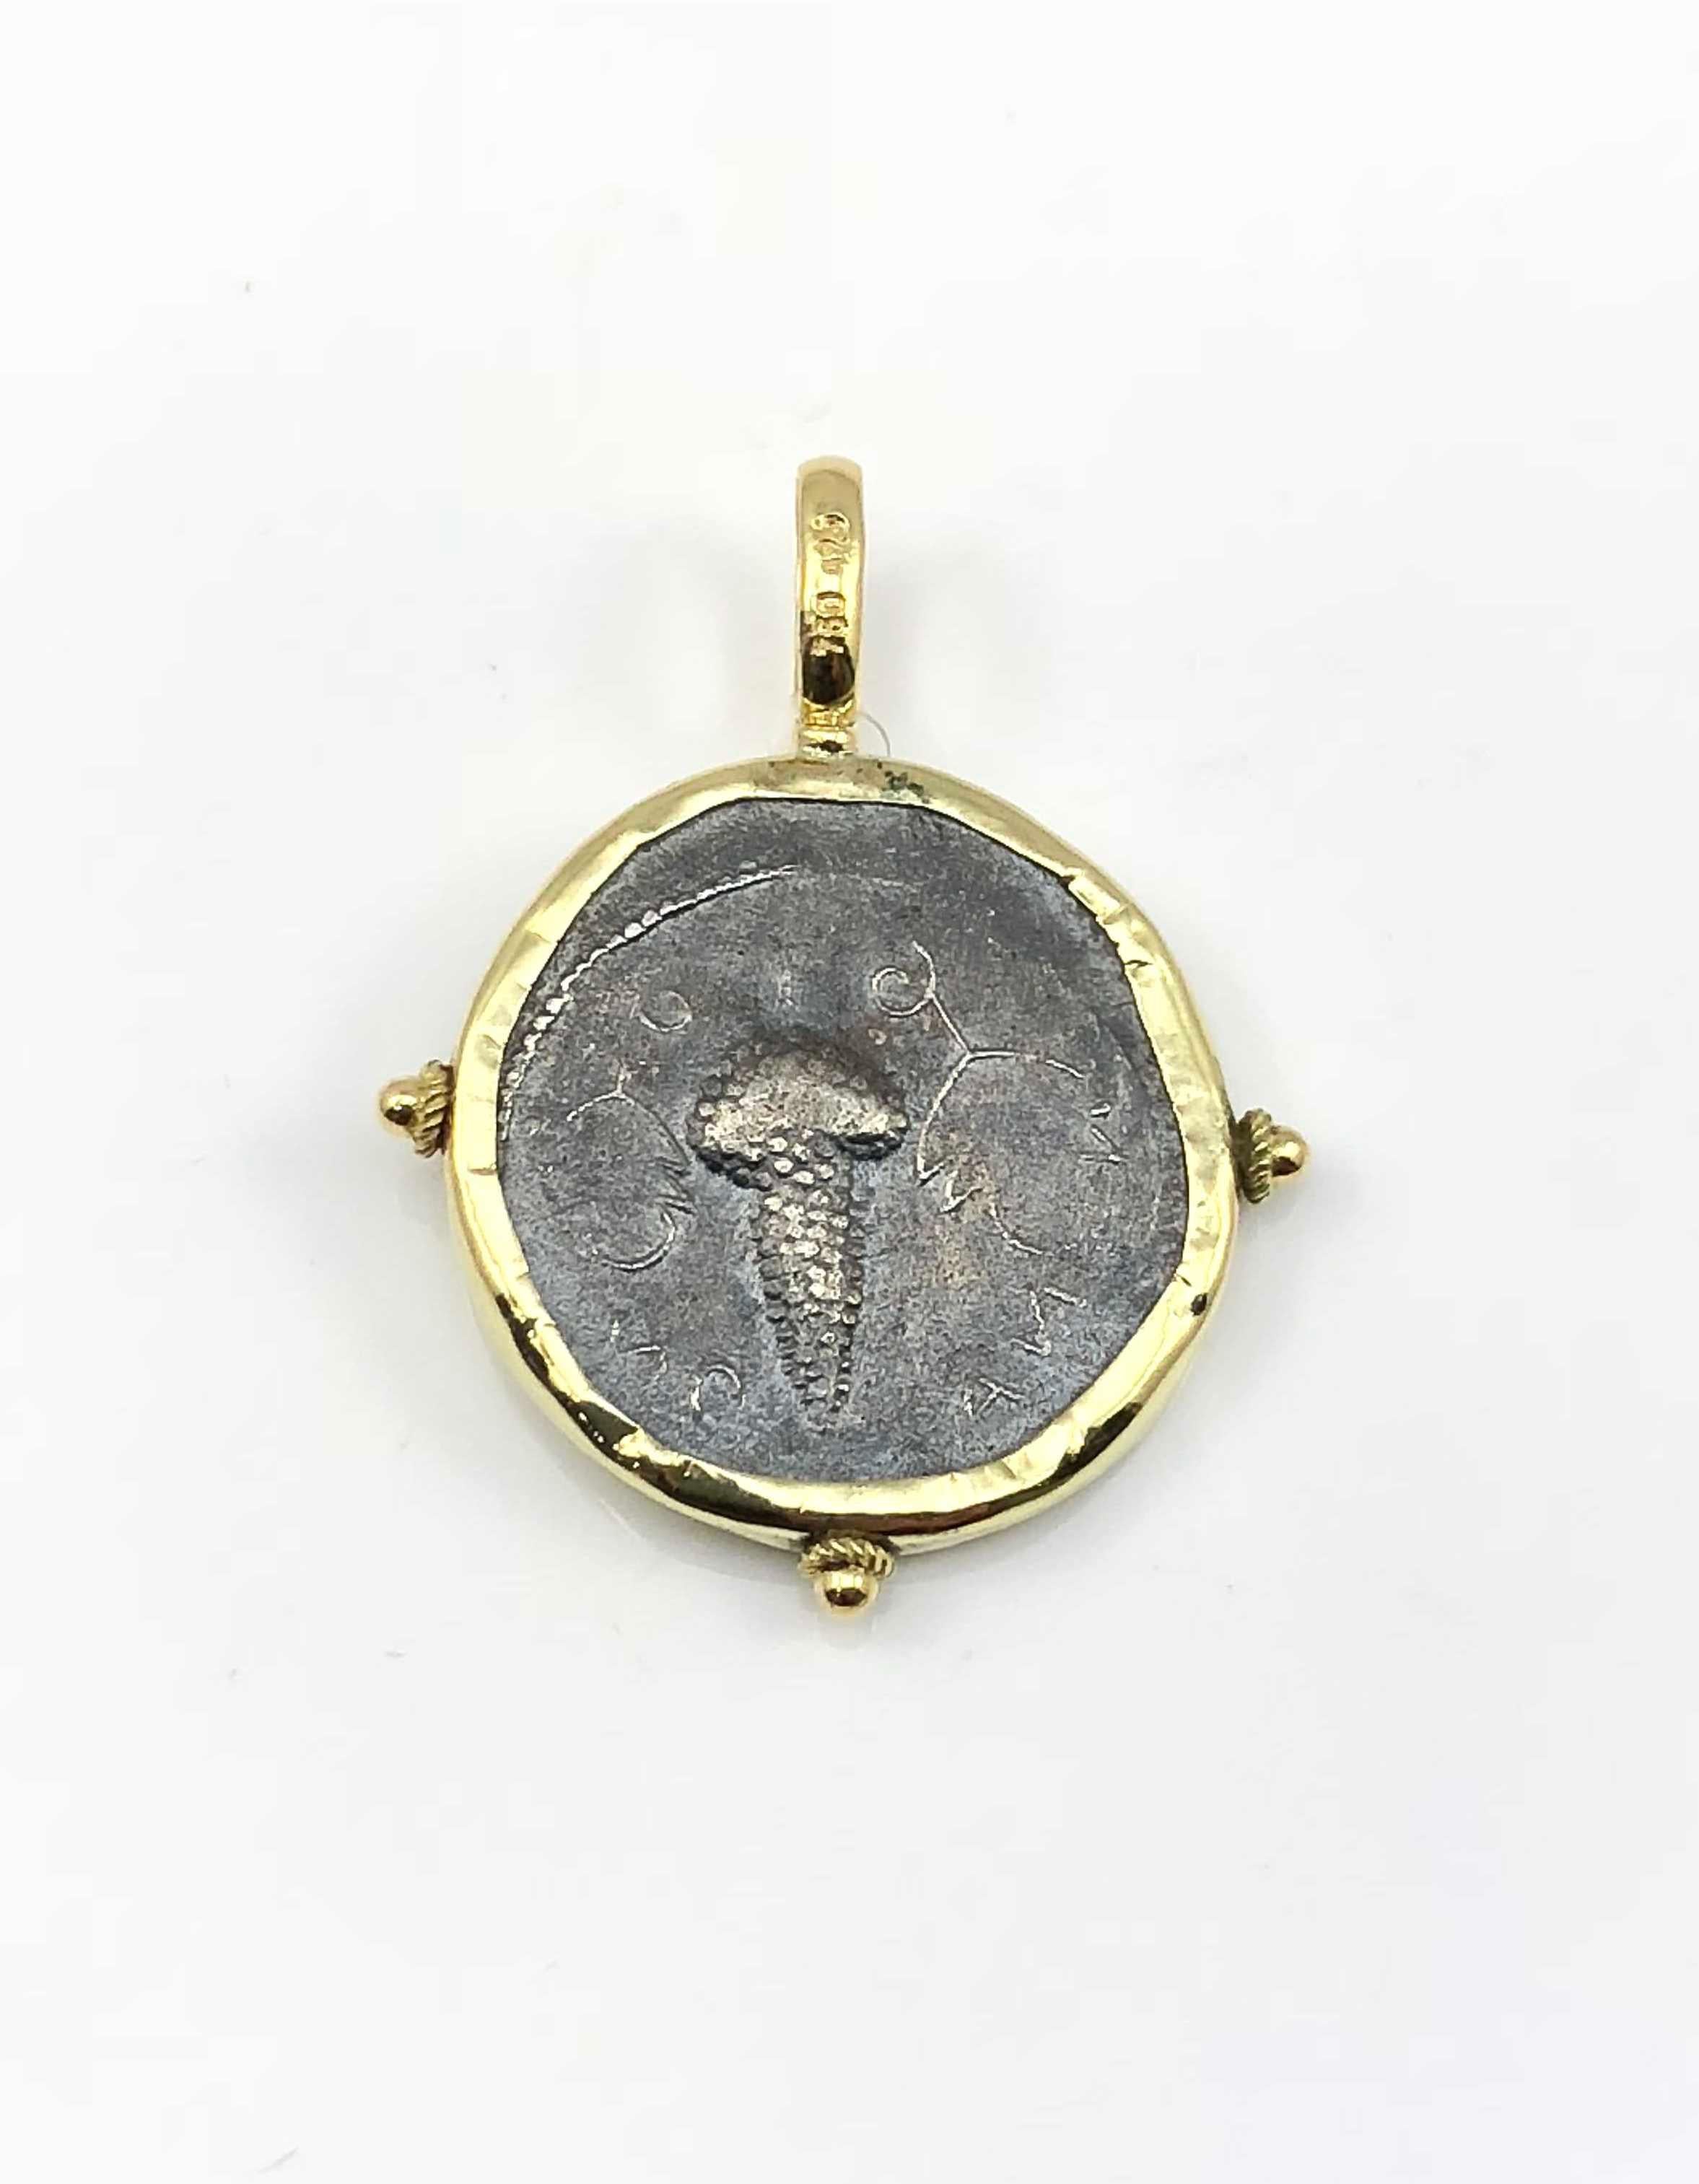 S.Georgios designer 18 Karat Yellow Gold handmade Pendant Necklace featuring a replica of an Ancient Greek Dionisis Coin in Silver 925. The coin has a beautiful reverse side and can be worn both ways. The rim and hook of the pendant are solid 18